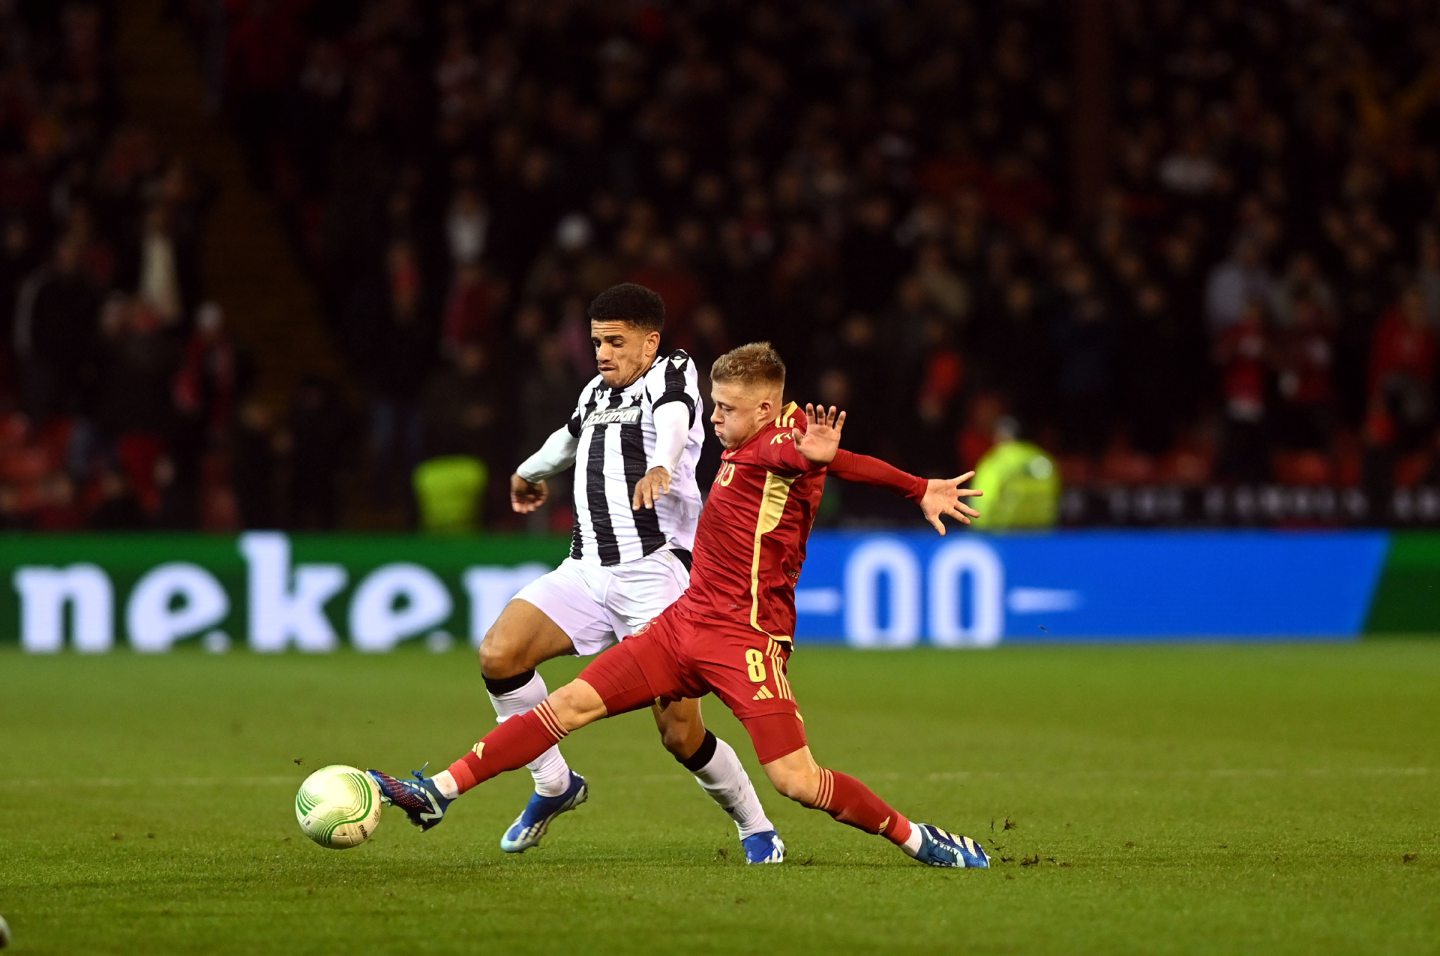 Aberdeen's Connor Barron and PAOK's Taison battle for the ball. 